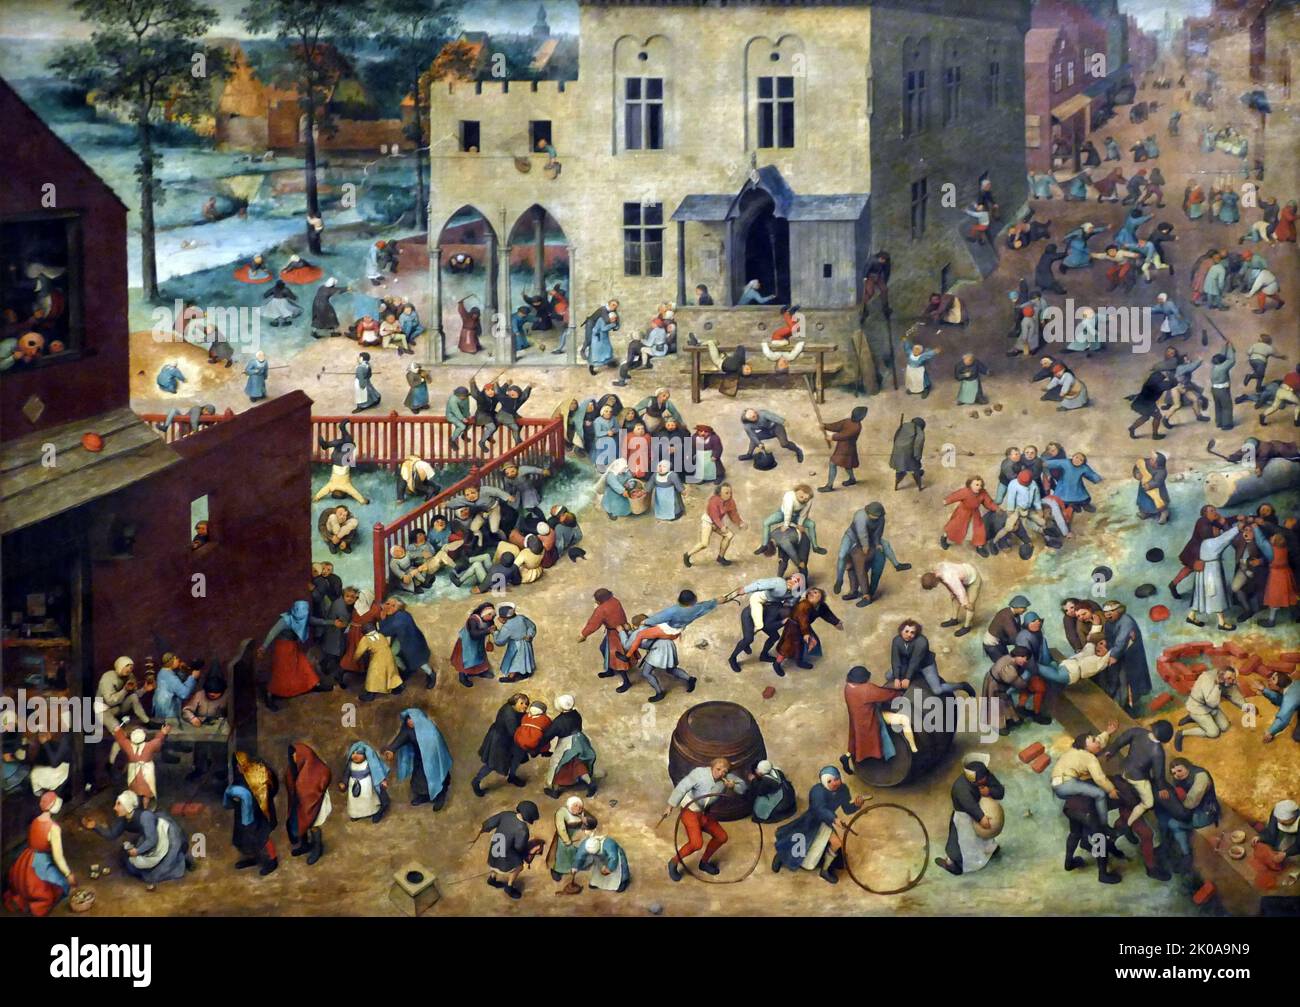 Children's games, 1560, by Jan Brueghel, c1597, by Jan Brueghel (1568 - 1625), a Flemish painter and draughtsman. He was the son of the eminent Flemish Renaissance painter Pieter Bruegel the Elder. A close friend and frequent collaborator with Peter Paul Rubens Stock Photo